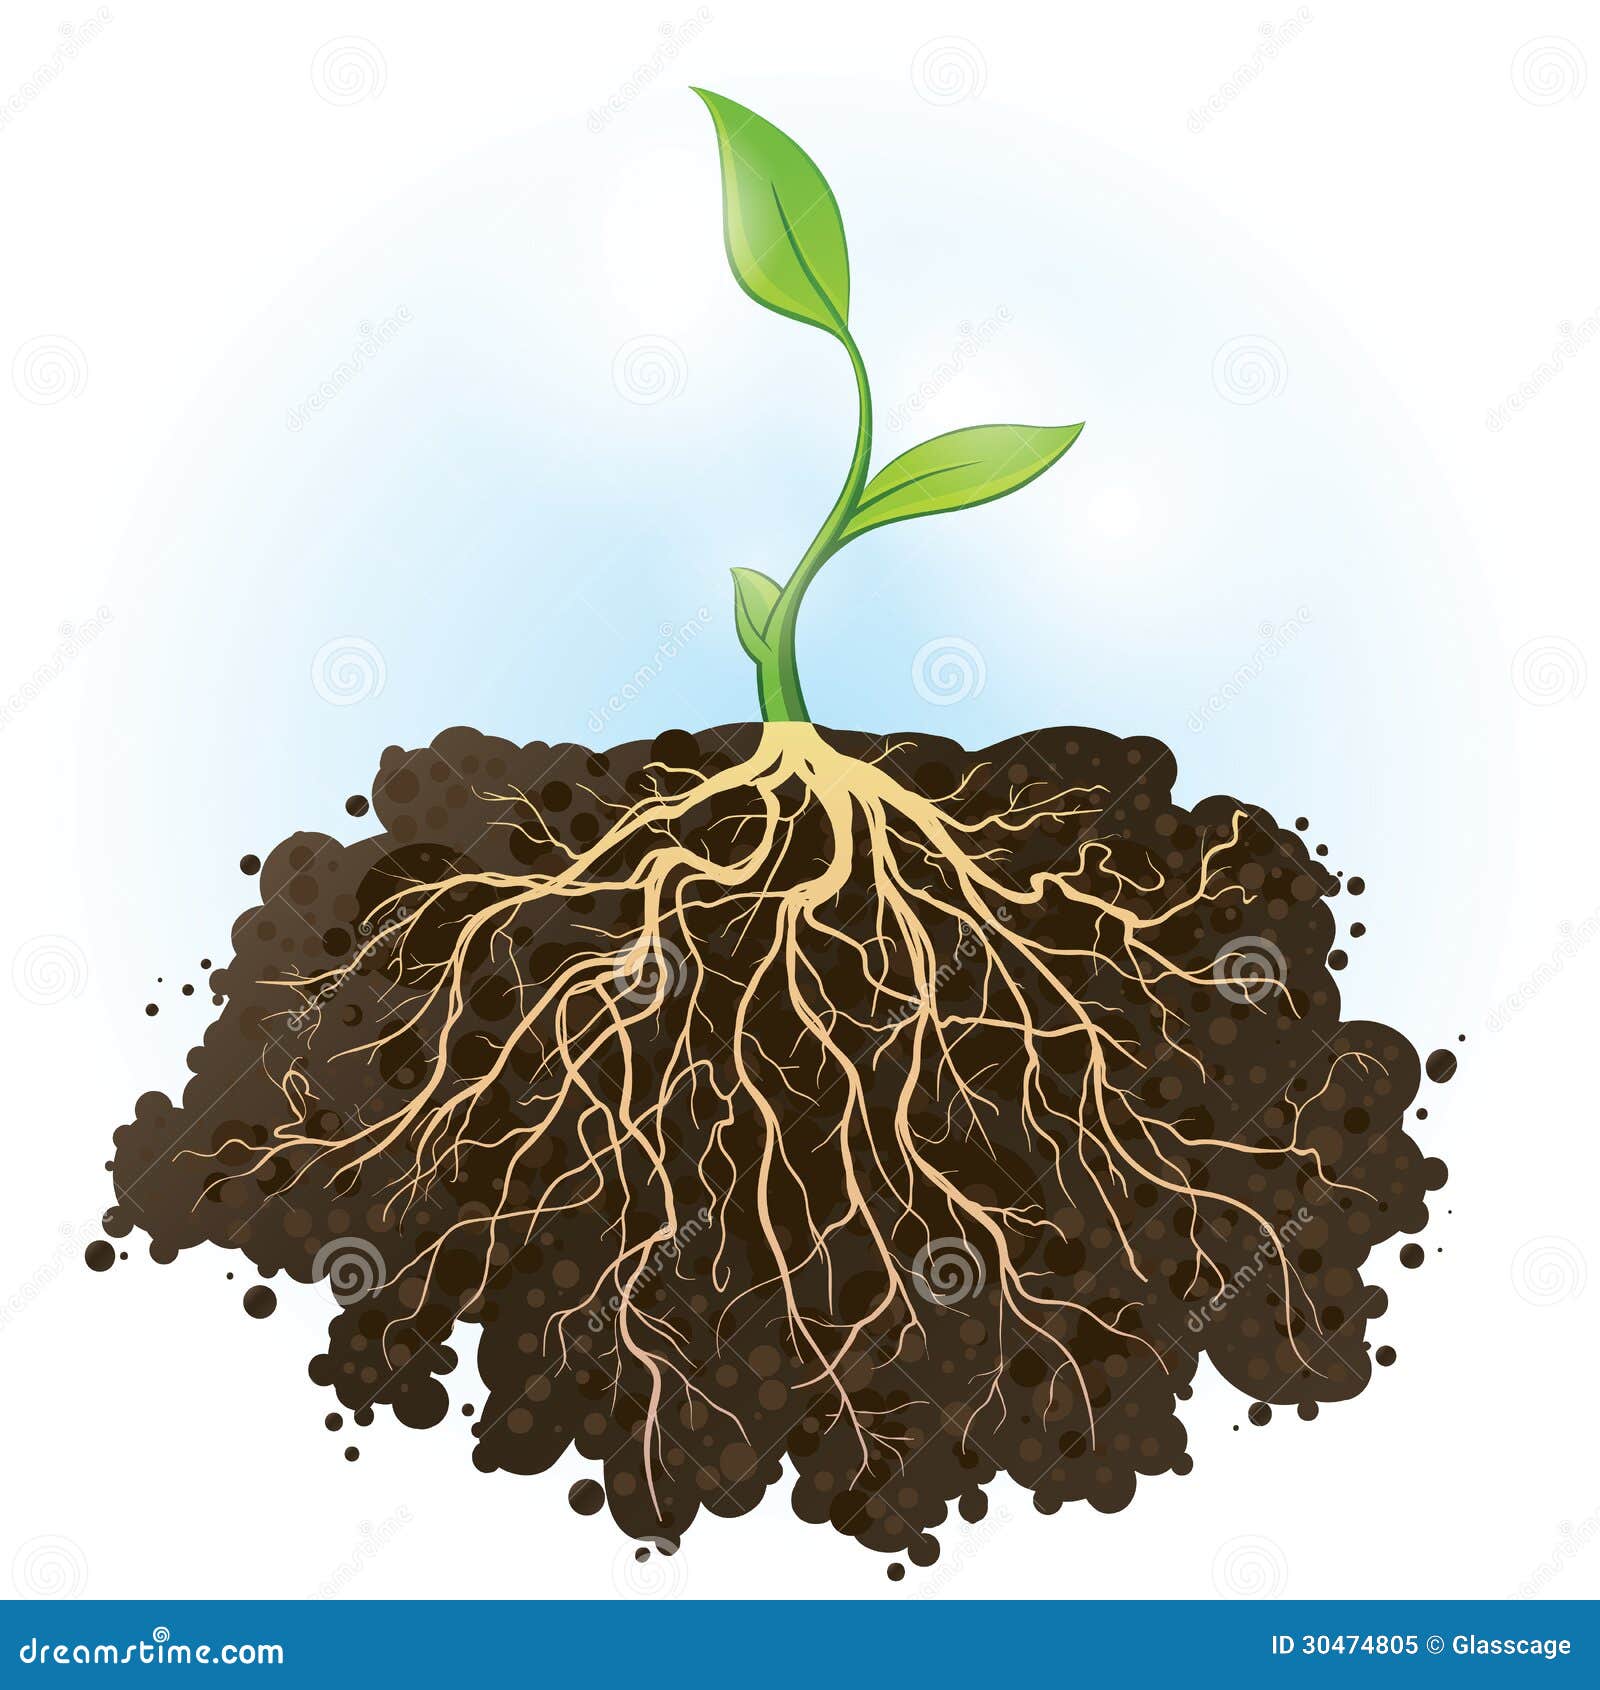 roots clipart